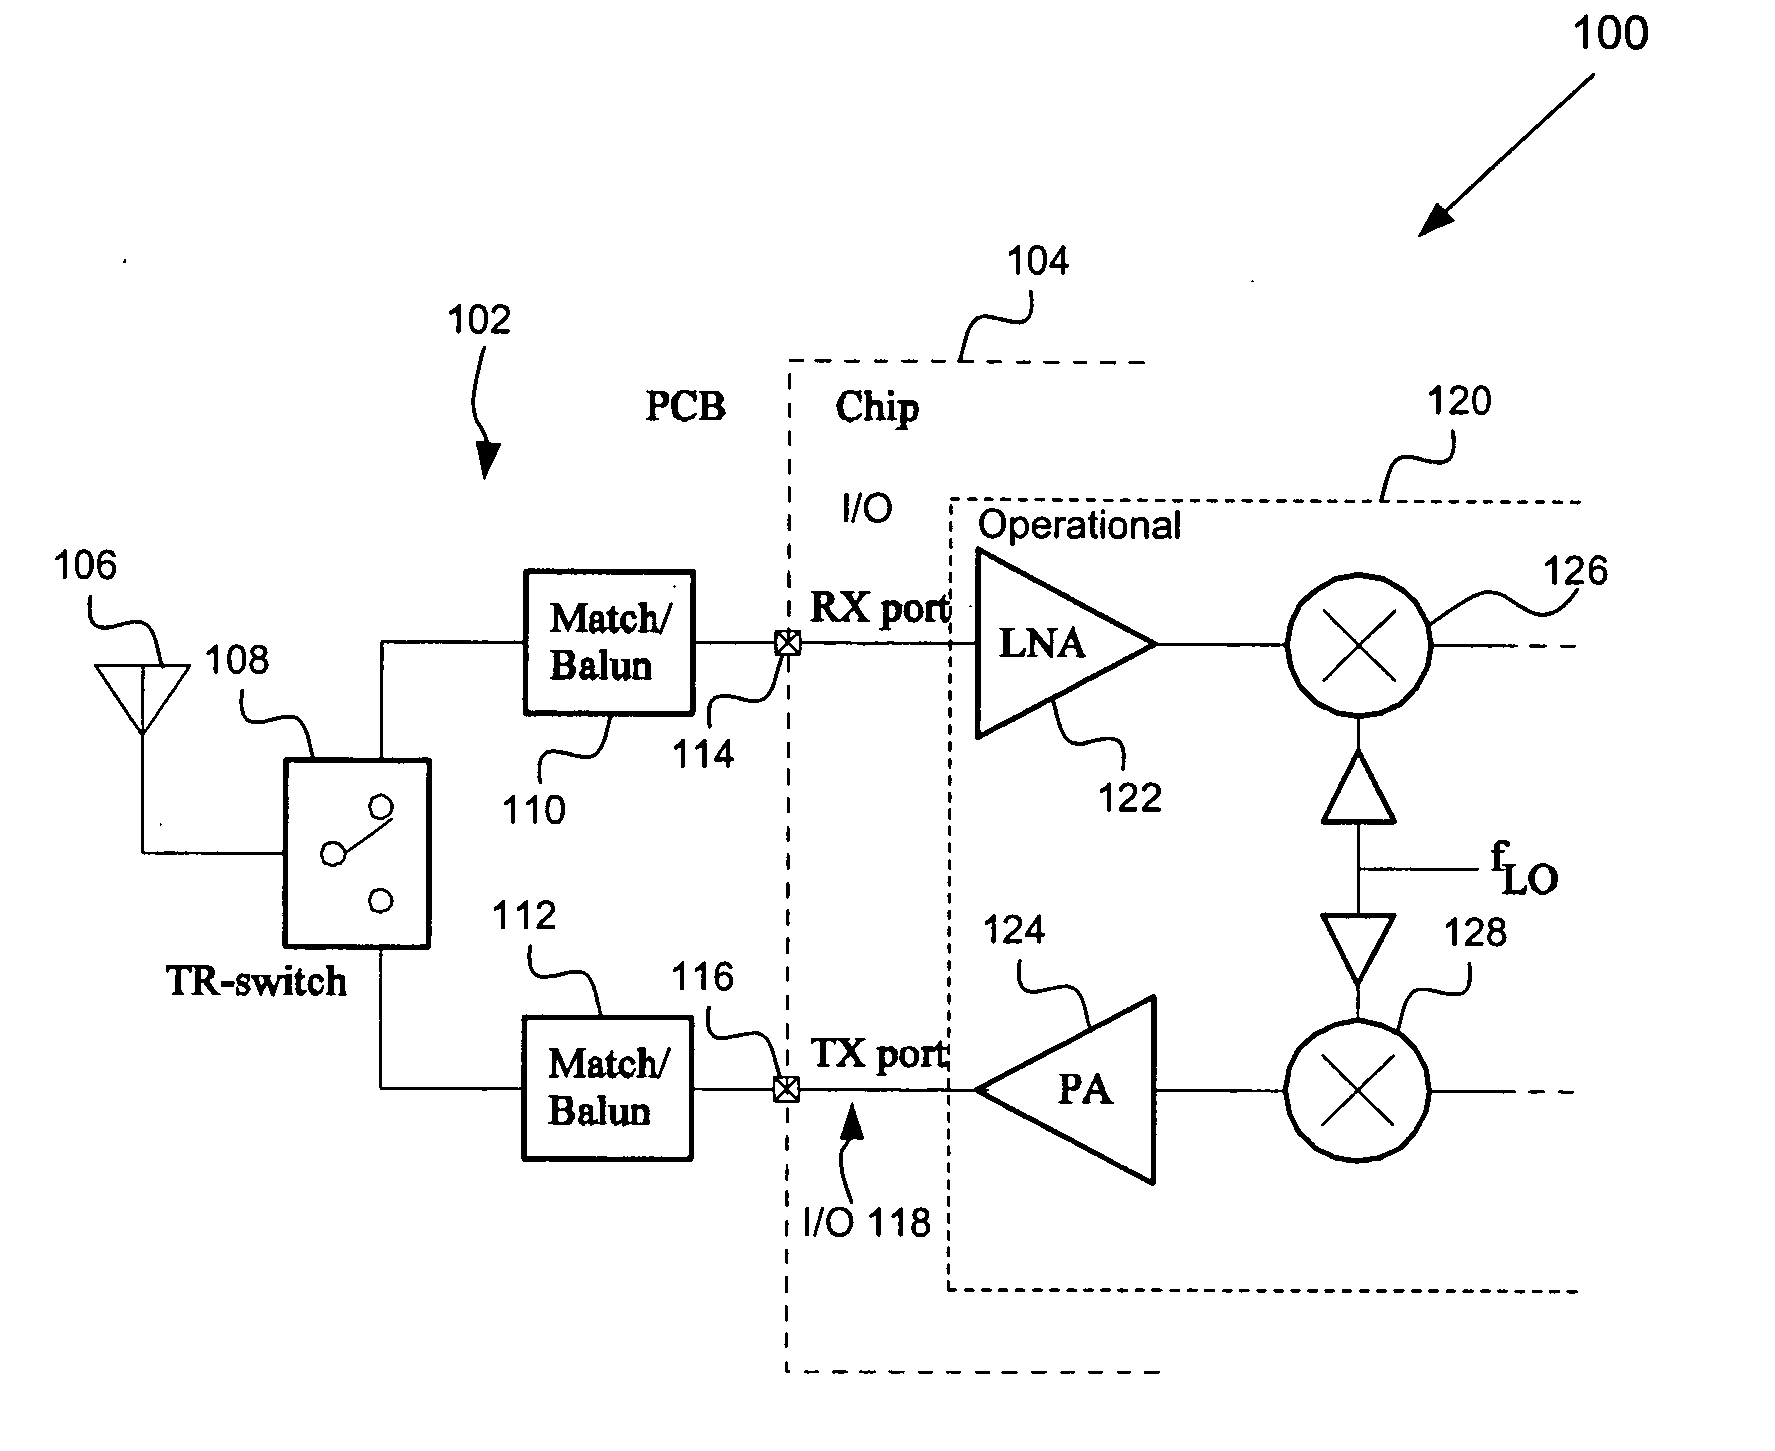 Transceiver system and method of using same